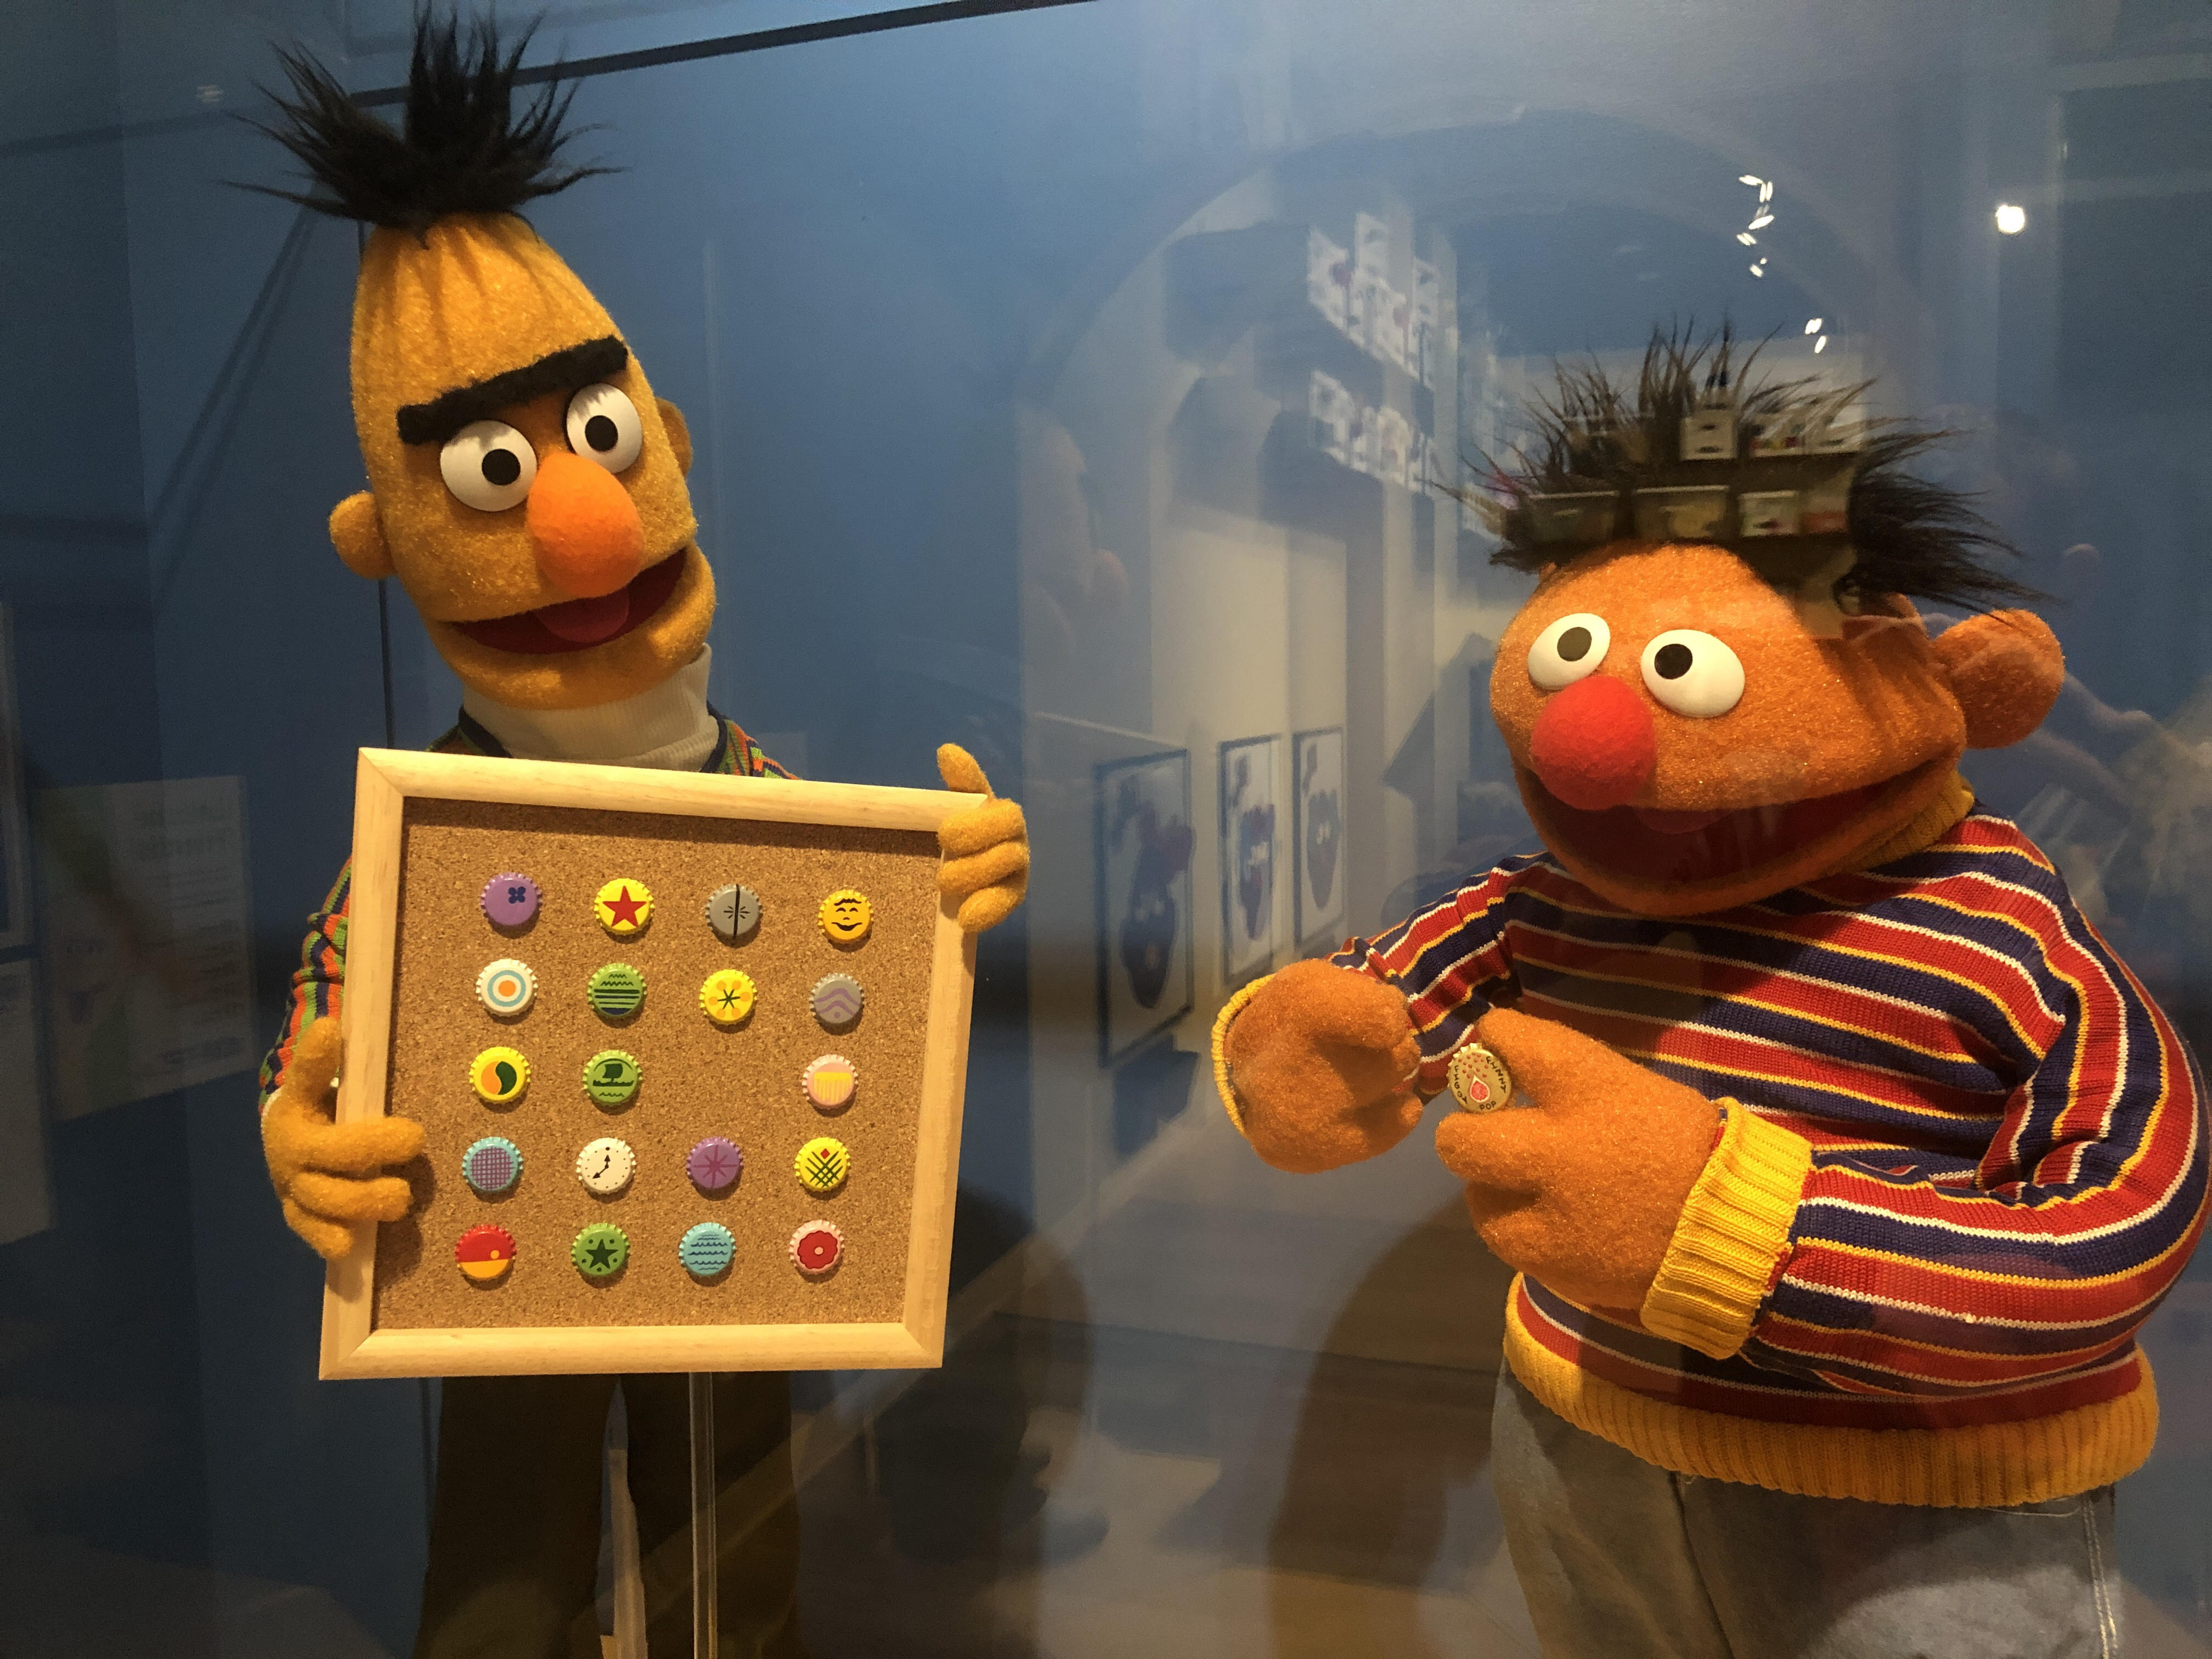 Bert and Ernie display at the Worlds of Puppetry Museum